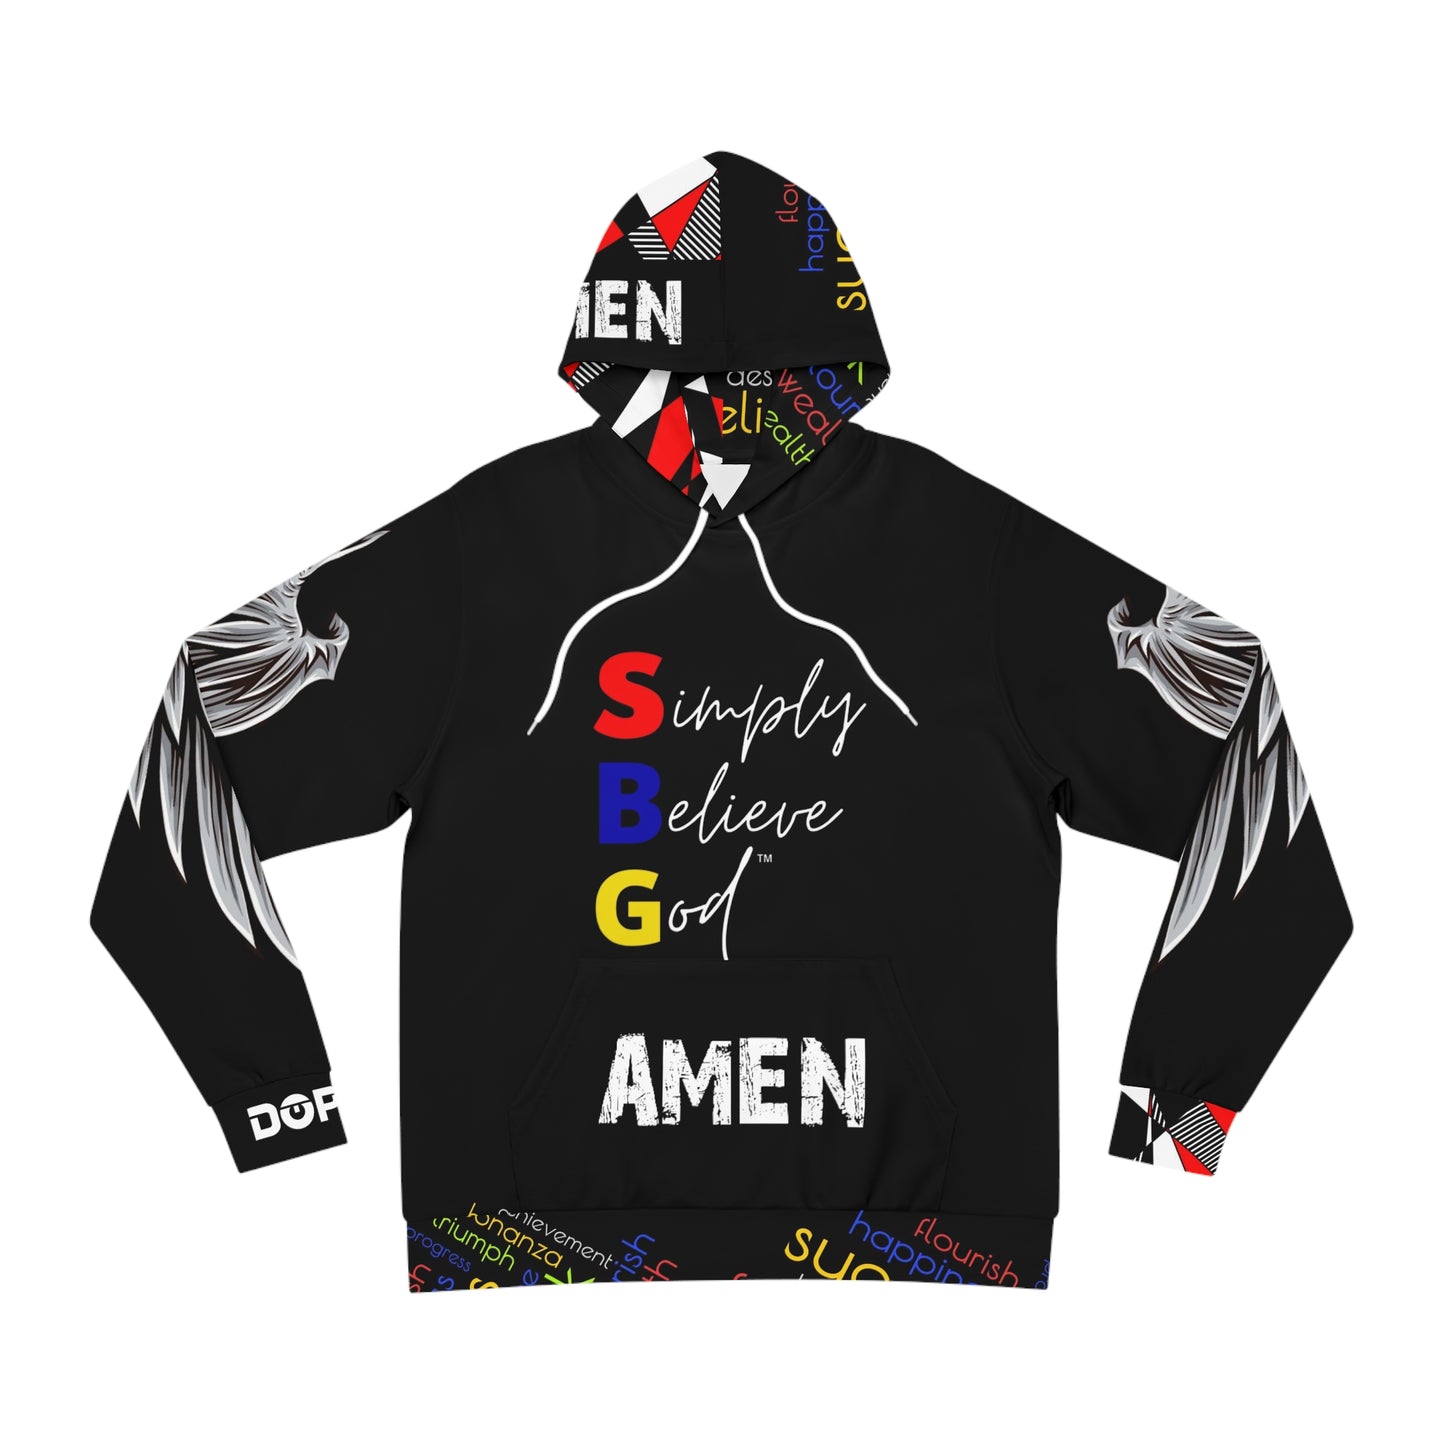 ✨"Simply Believe God"✨Fashion Hoodie DOPiFiED Edition